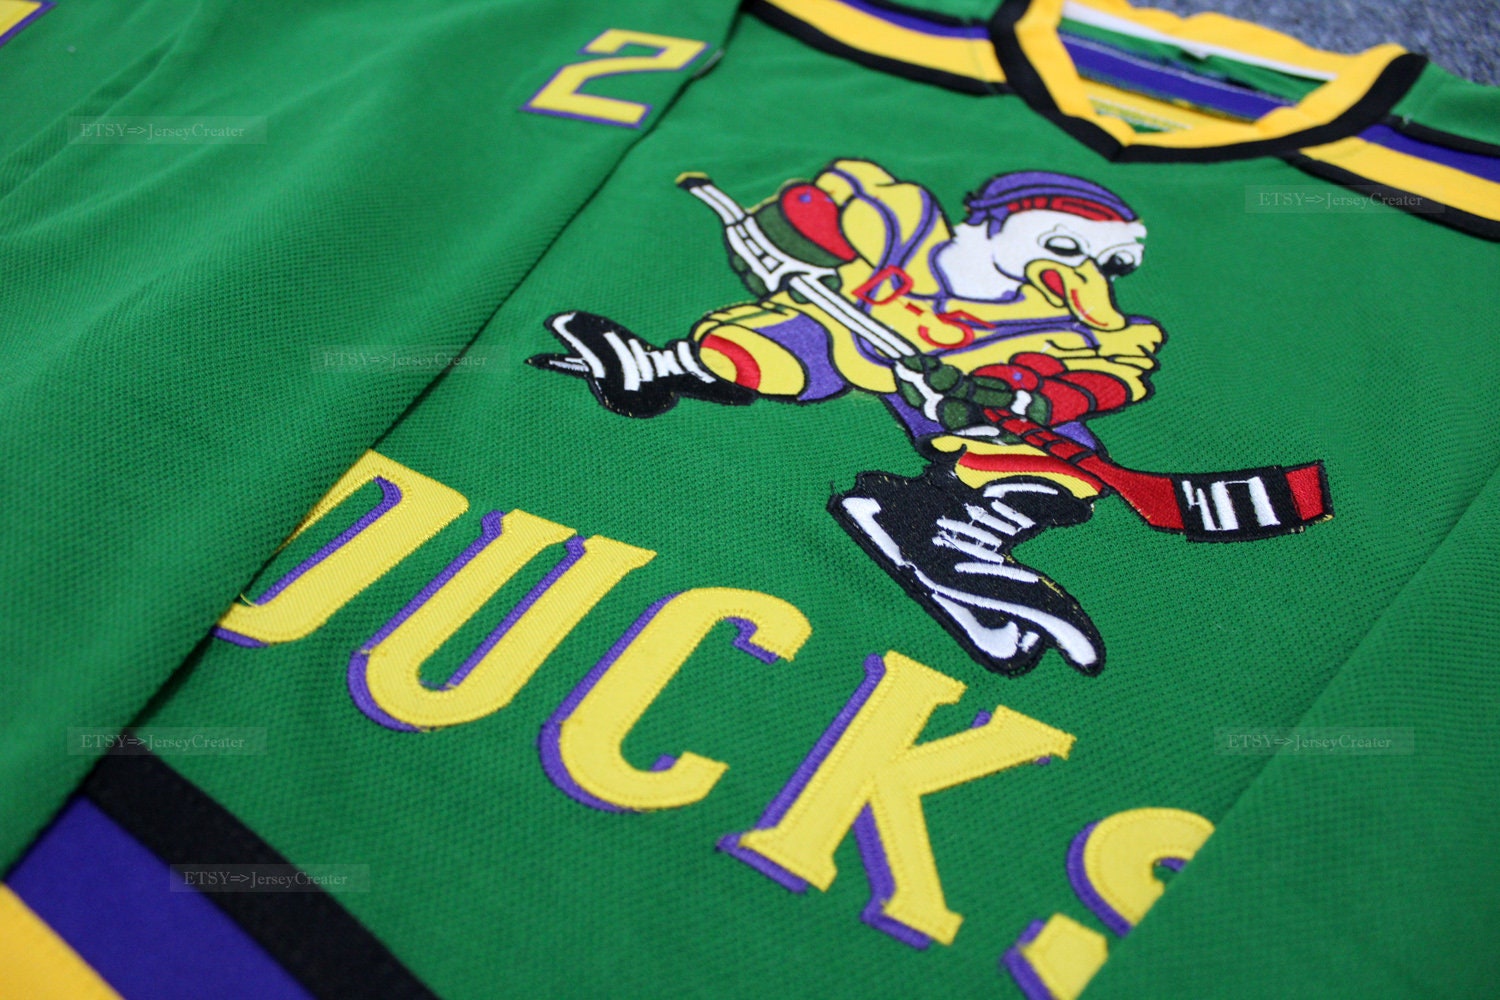 Custom Hockey Jerseys with The Dirty Ducks Twill Logo Adult Small / (Player Number and Name) / Green